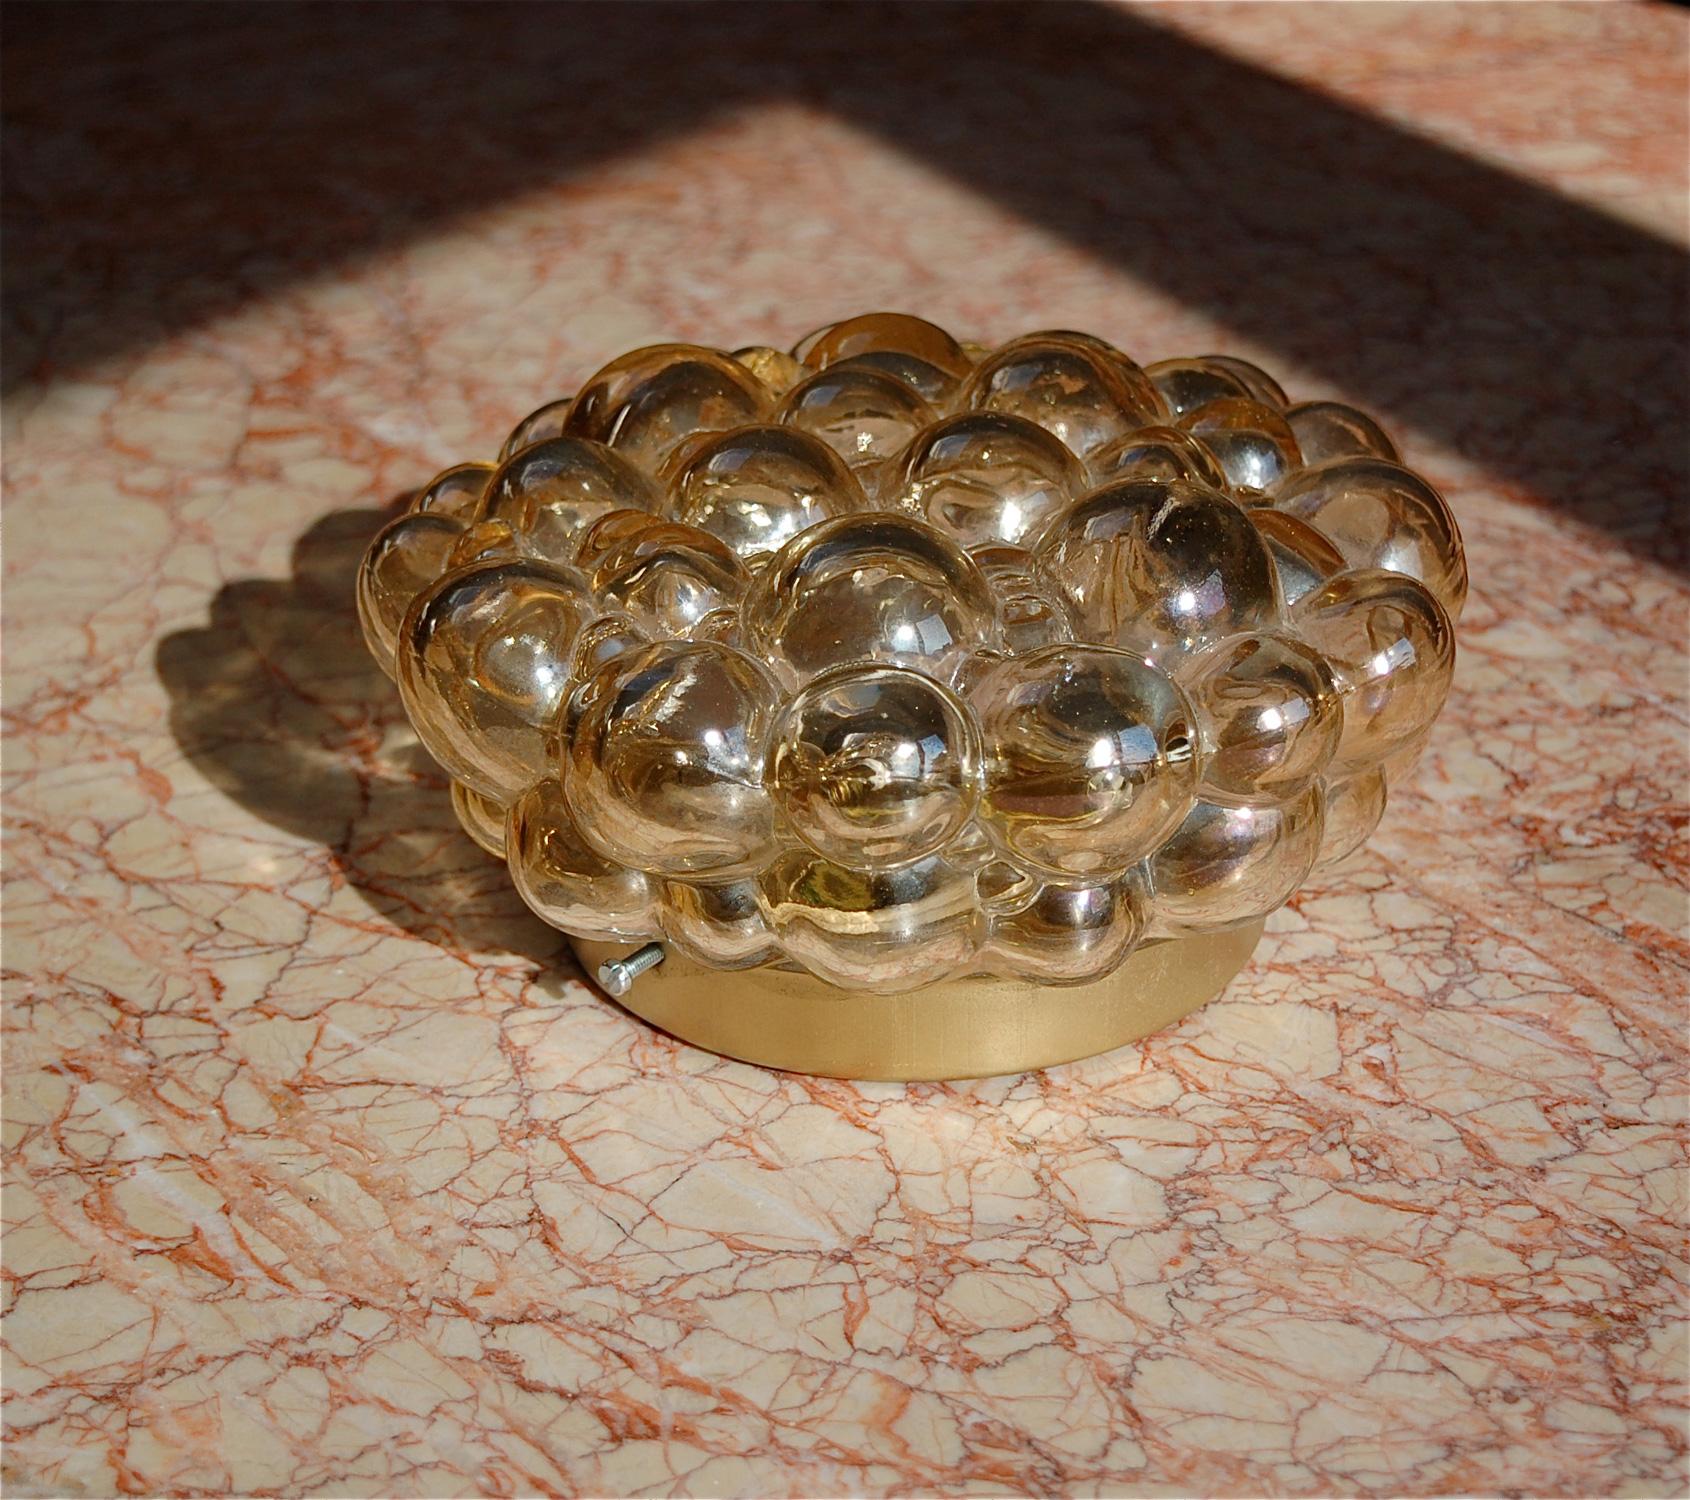 Amber Bubble Ceiling Light by Helena Tynell, circa 1960s (Moderne der Mitte des Jahrhunderts)